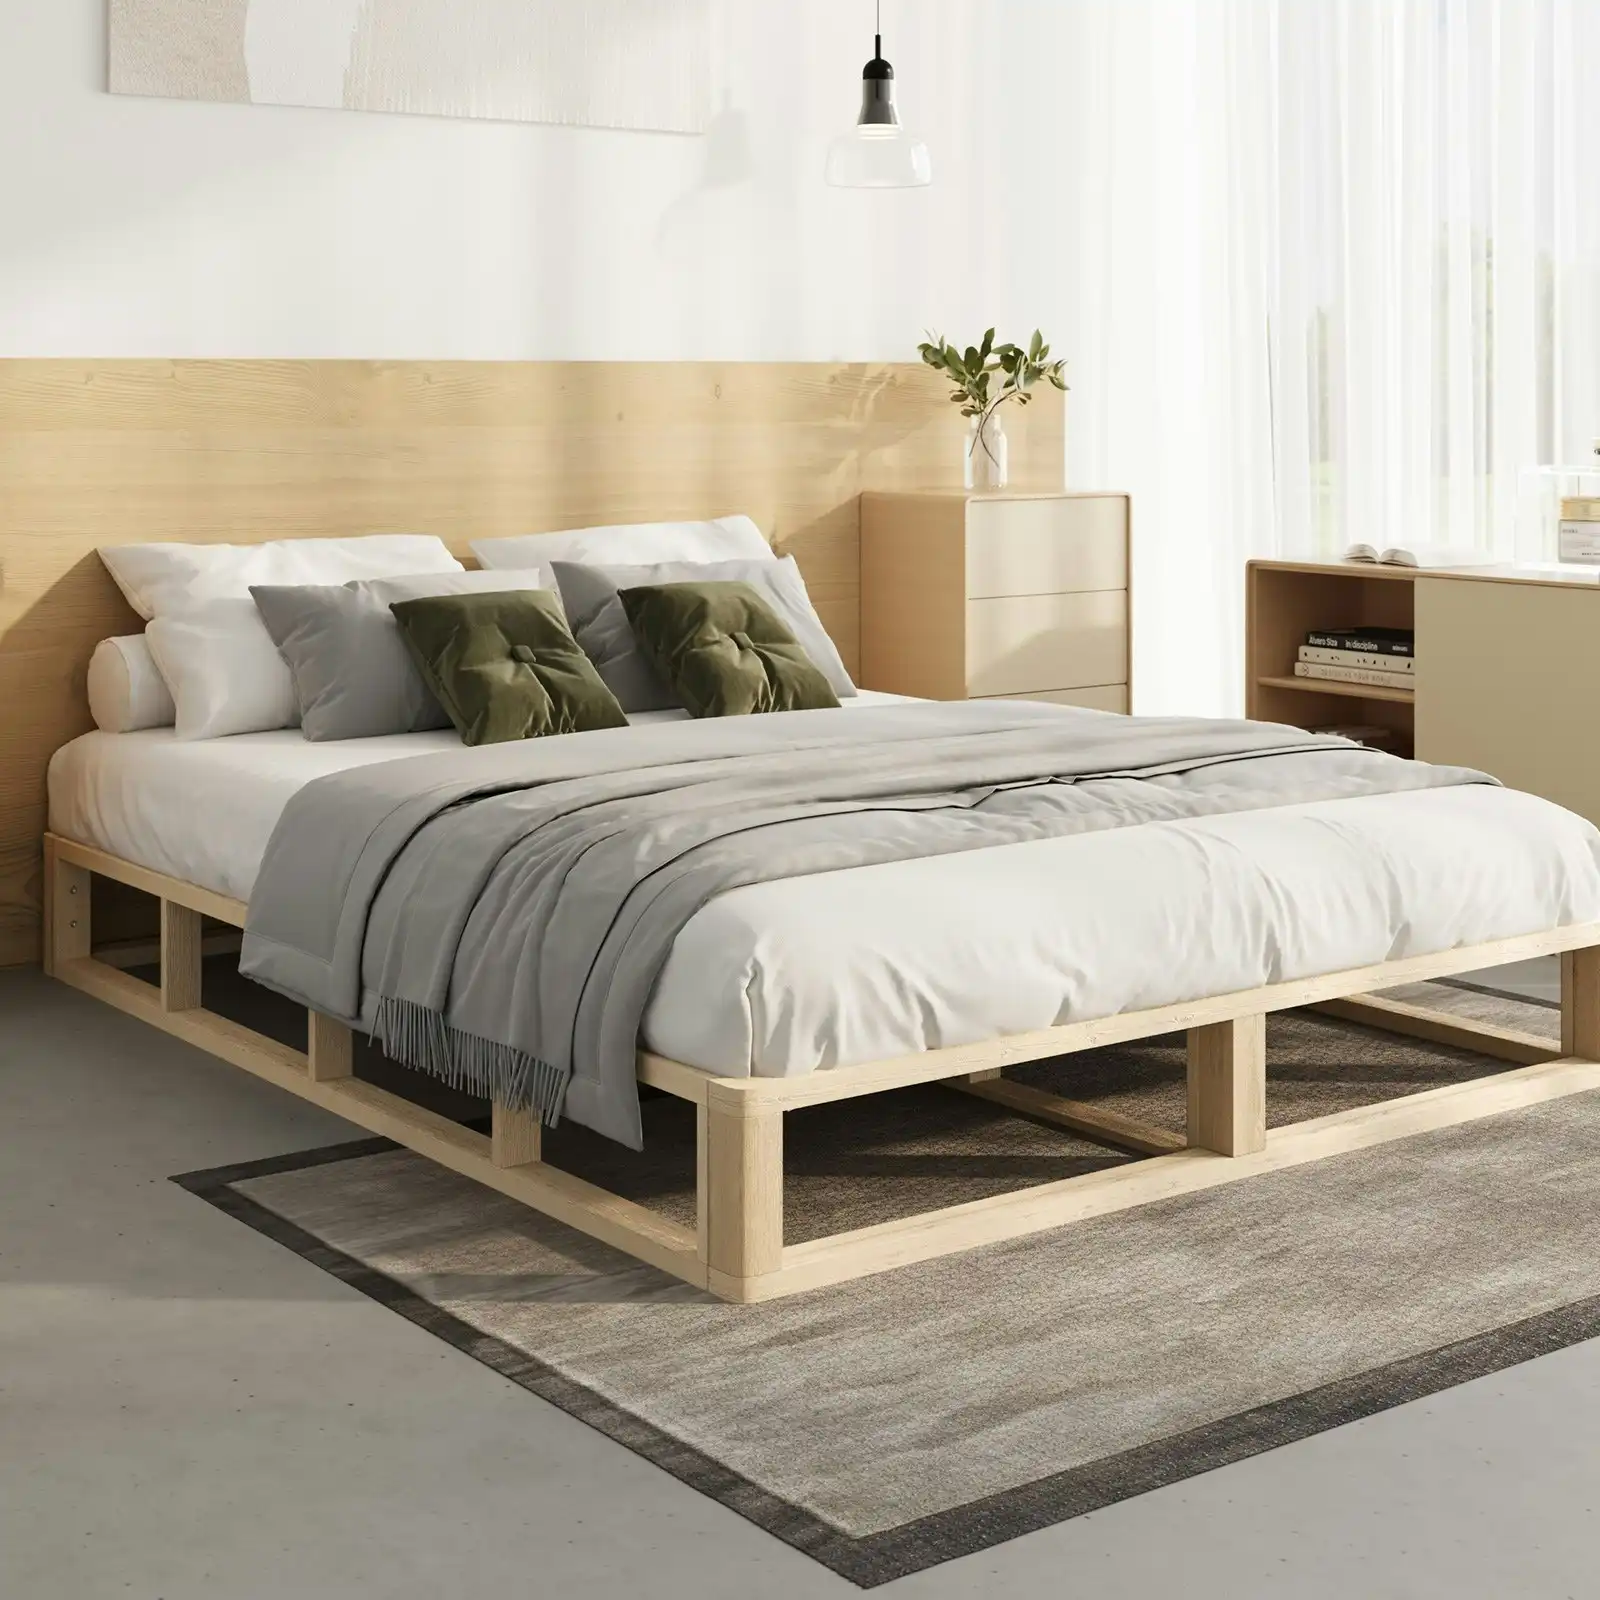 Oikiture Bed Frame Double Size Bed Base Wooden Platform Cage-like Base